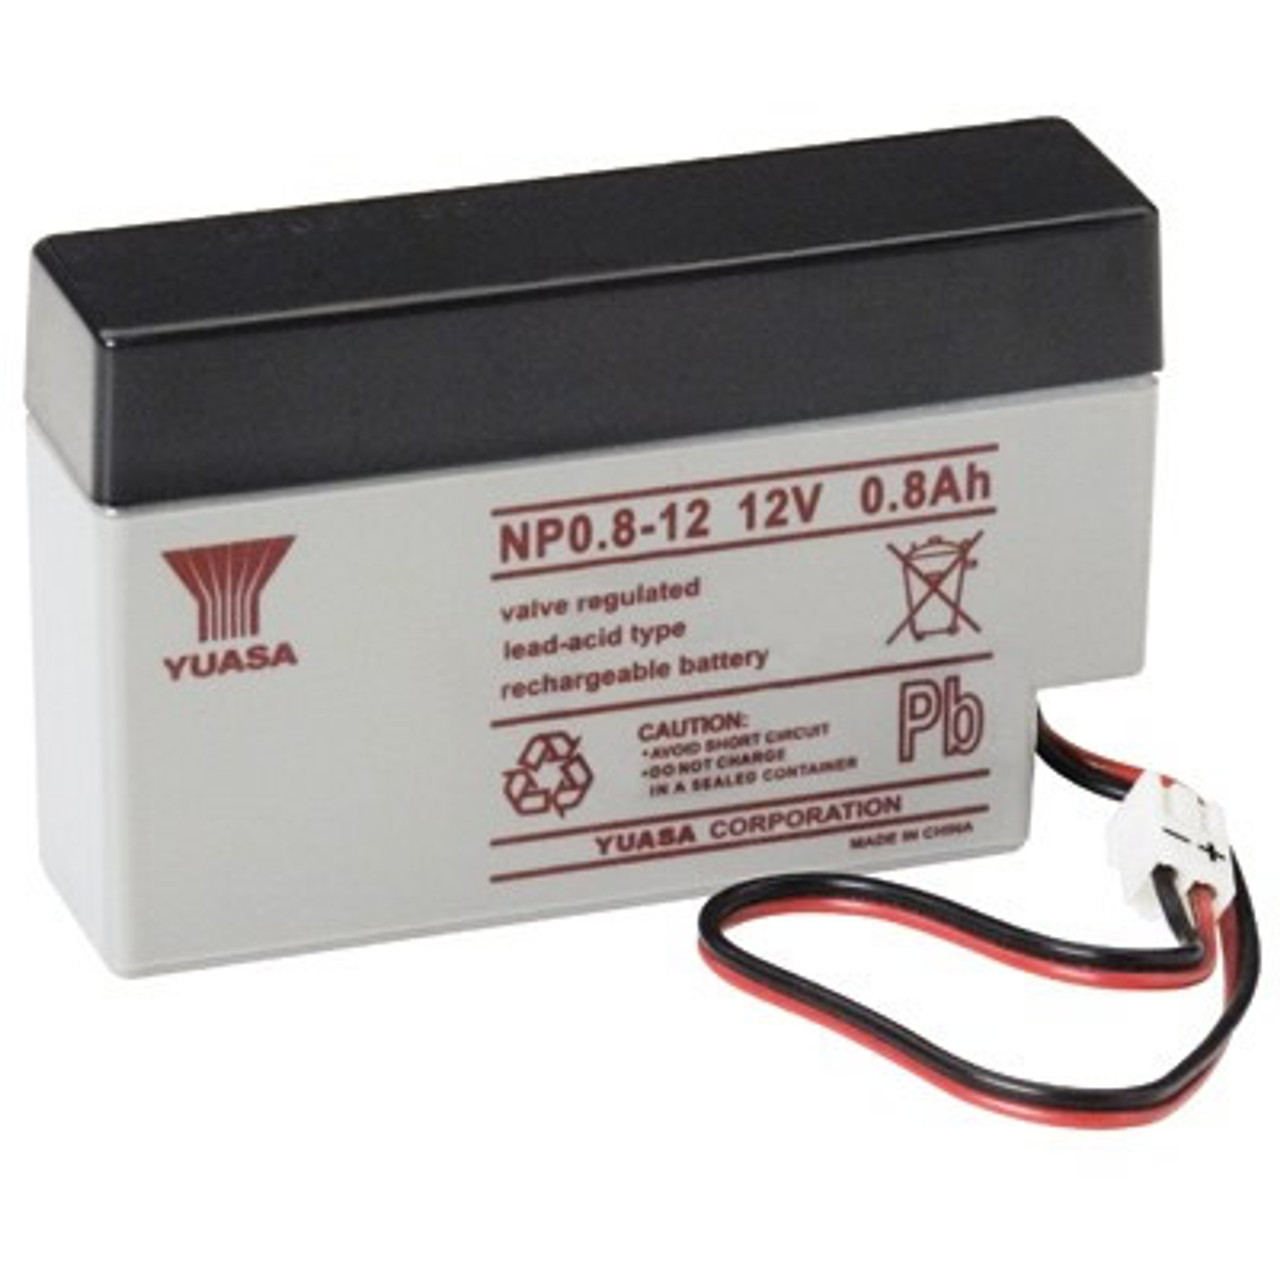 Genesis Yuasa NP0.8-12 Battery - 12V 0.8Ah Sealed Rechargeable, Replacement Batteries for PS-1208, PS-1208WL, PS1208, PS1208WL